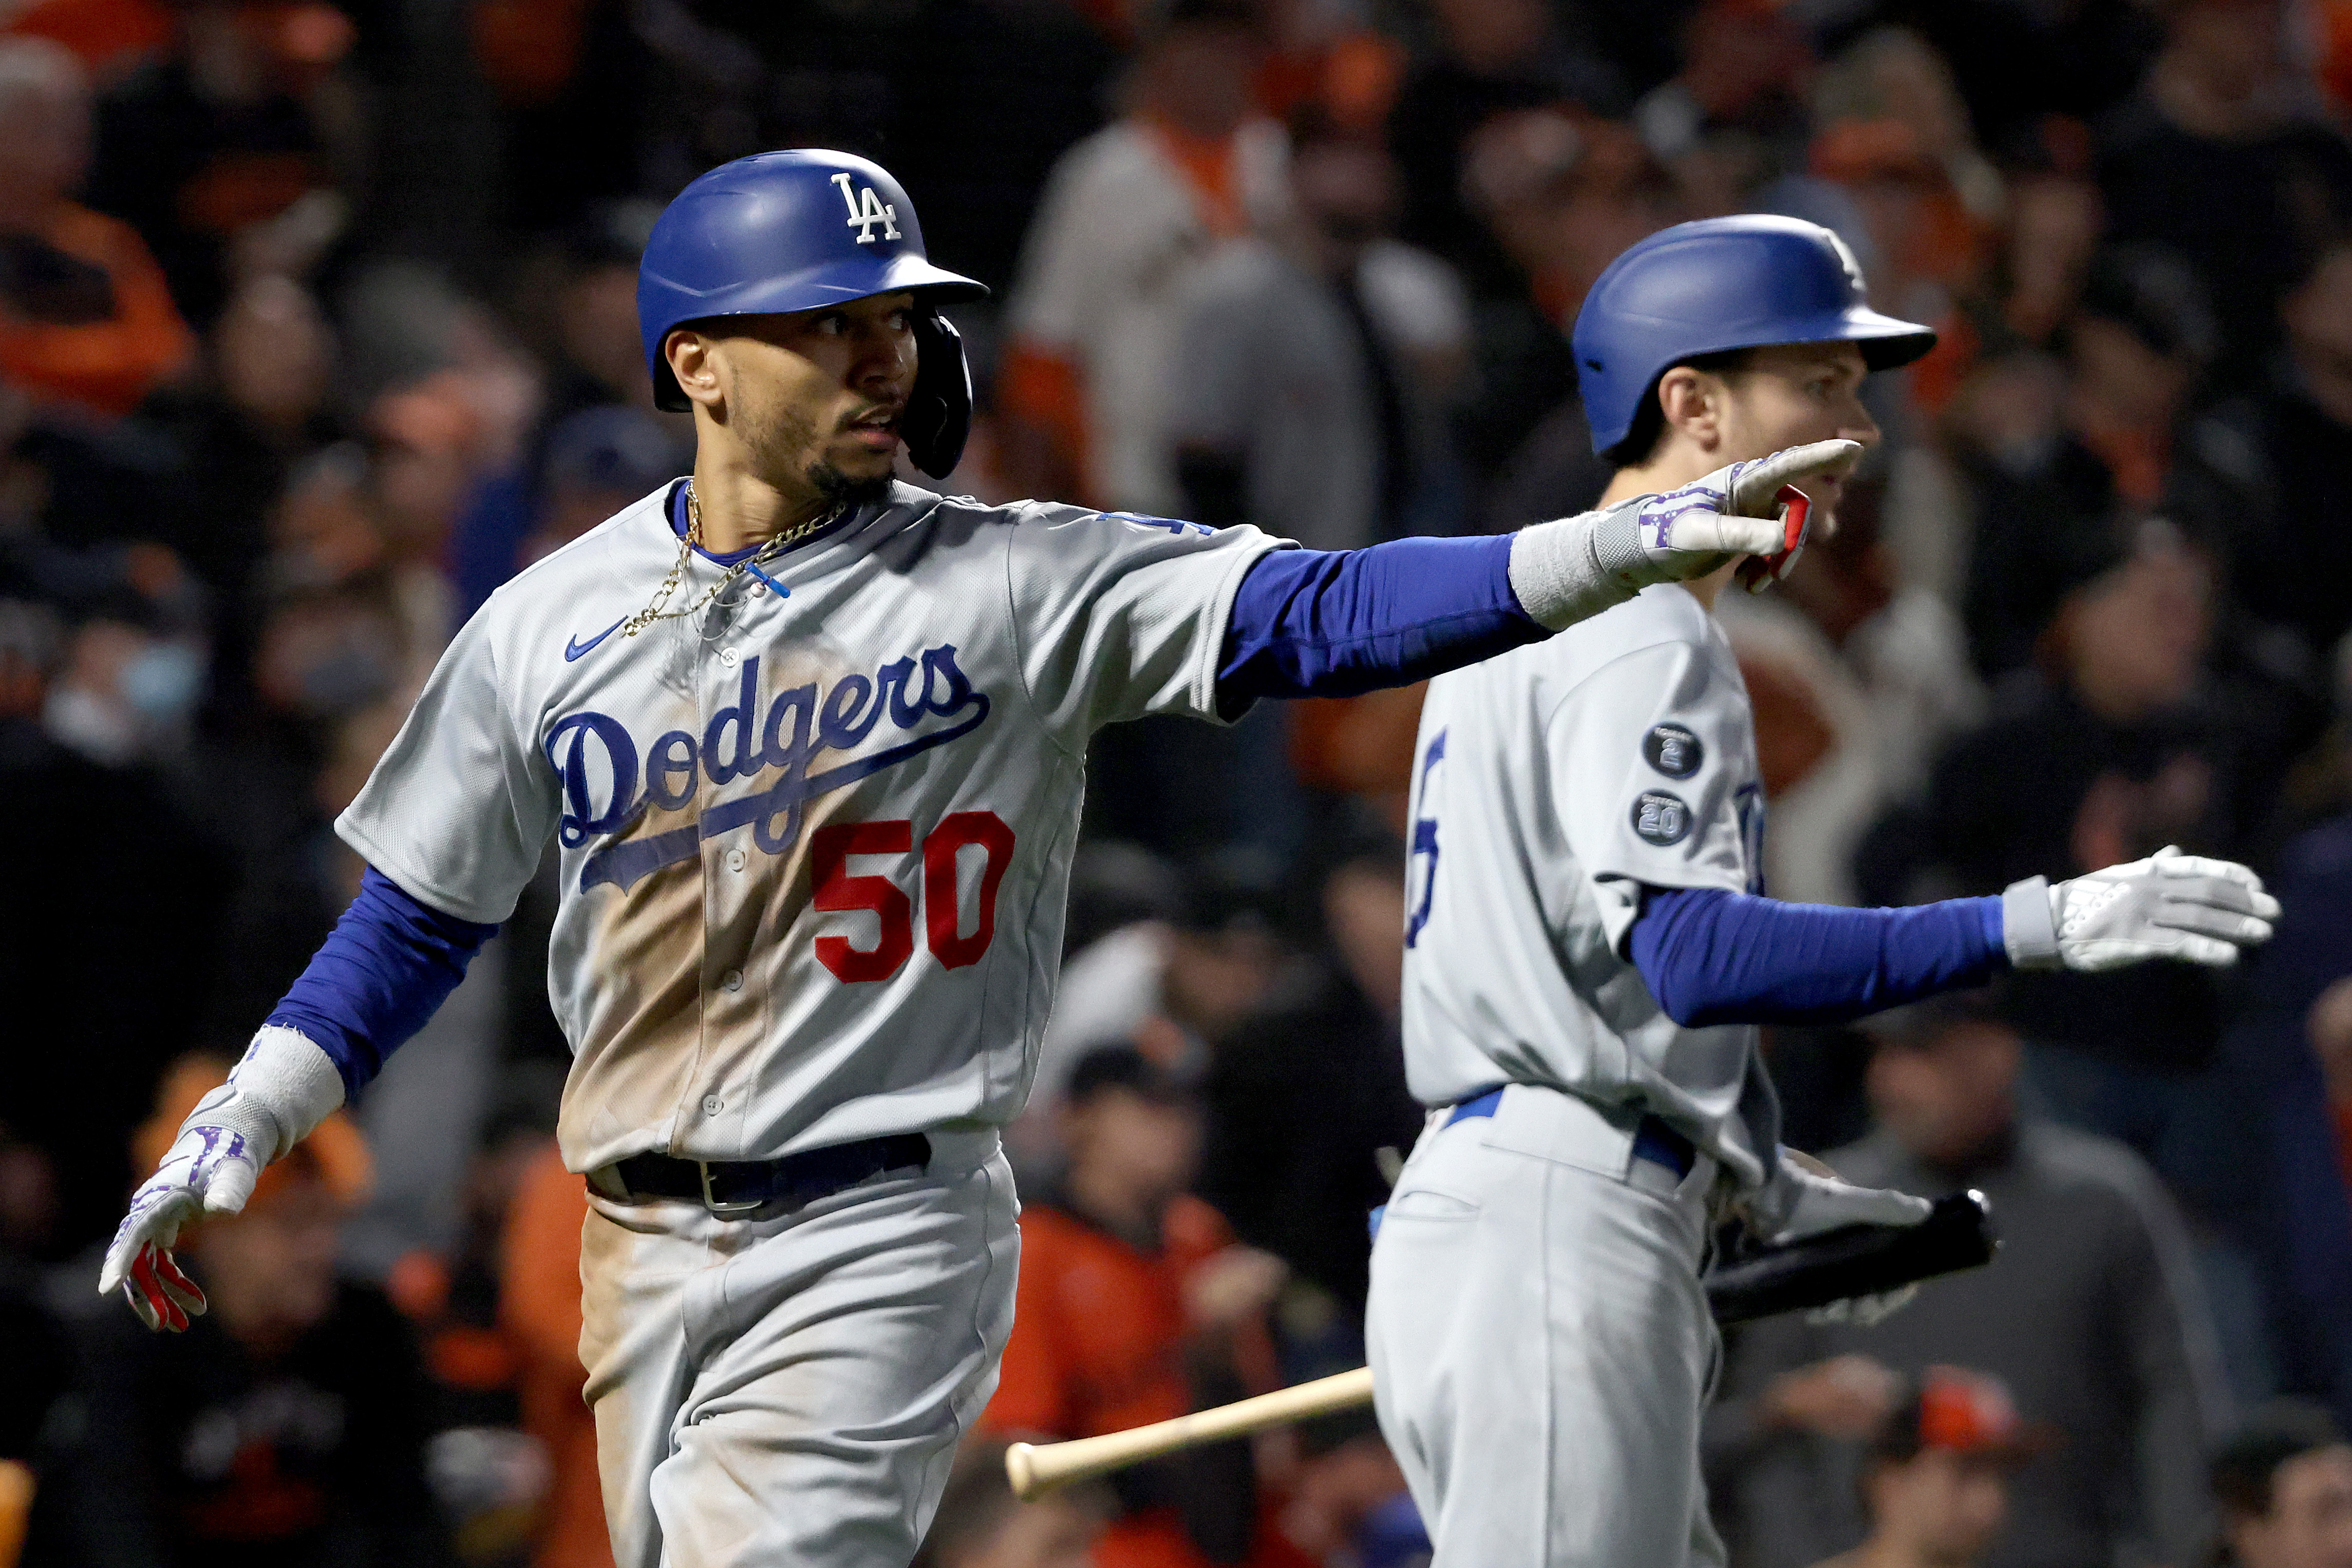 Yankees-Dodgers rivalry elicits thoughts past and future